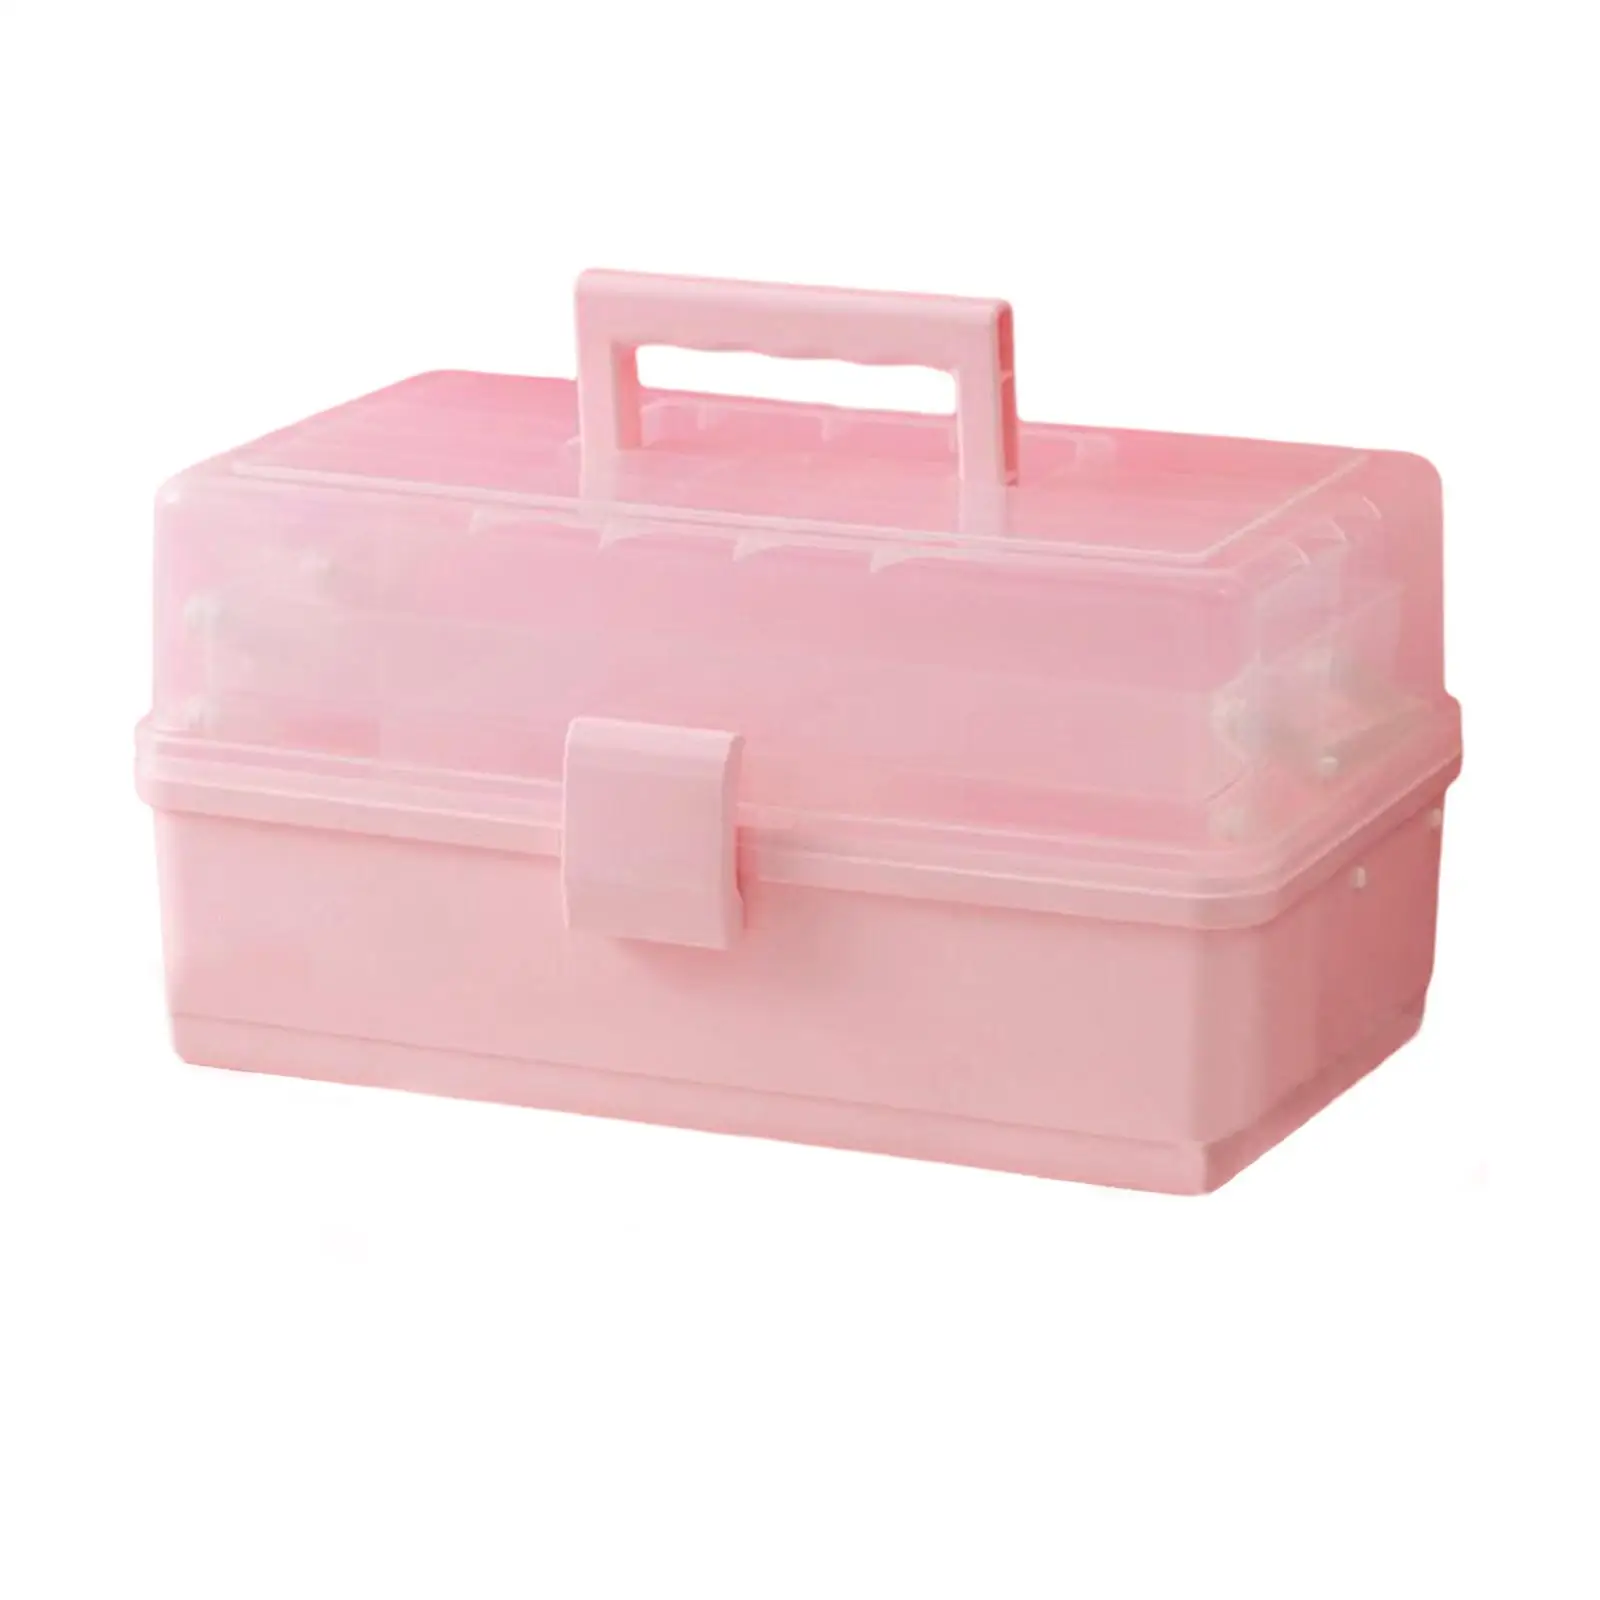 Hair Accessories Storage Box Lockable Multi Layers Pink for Jewelry Children